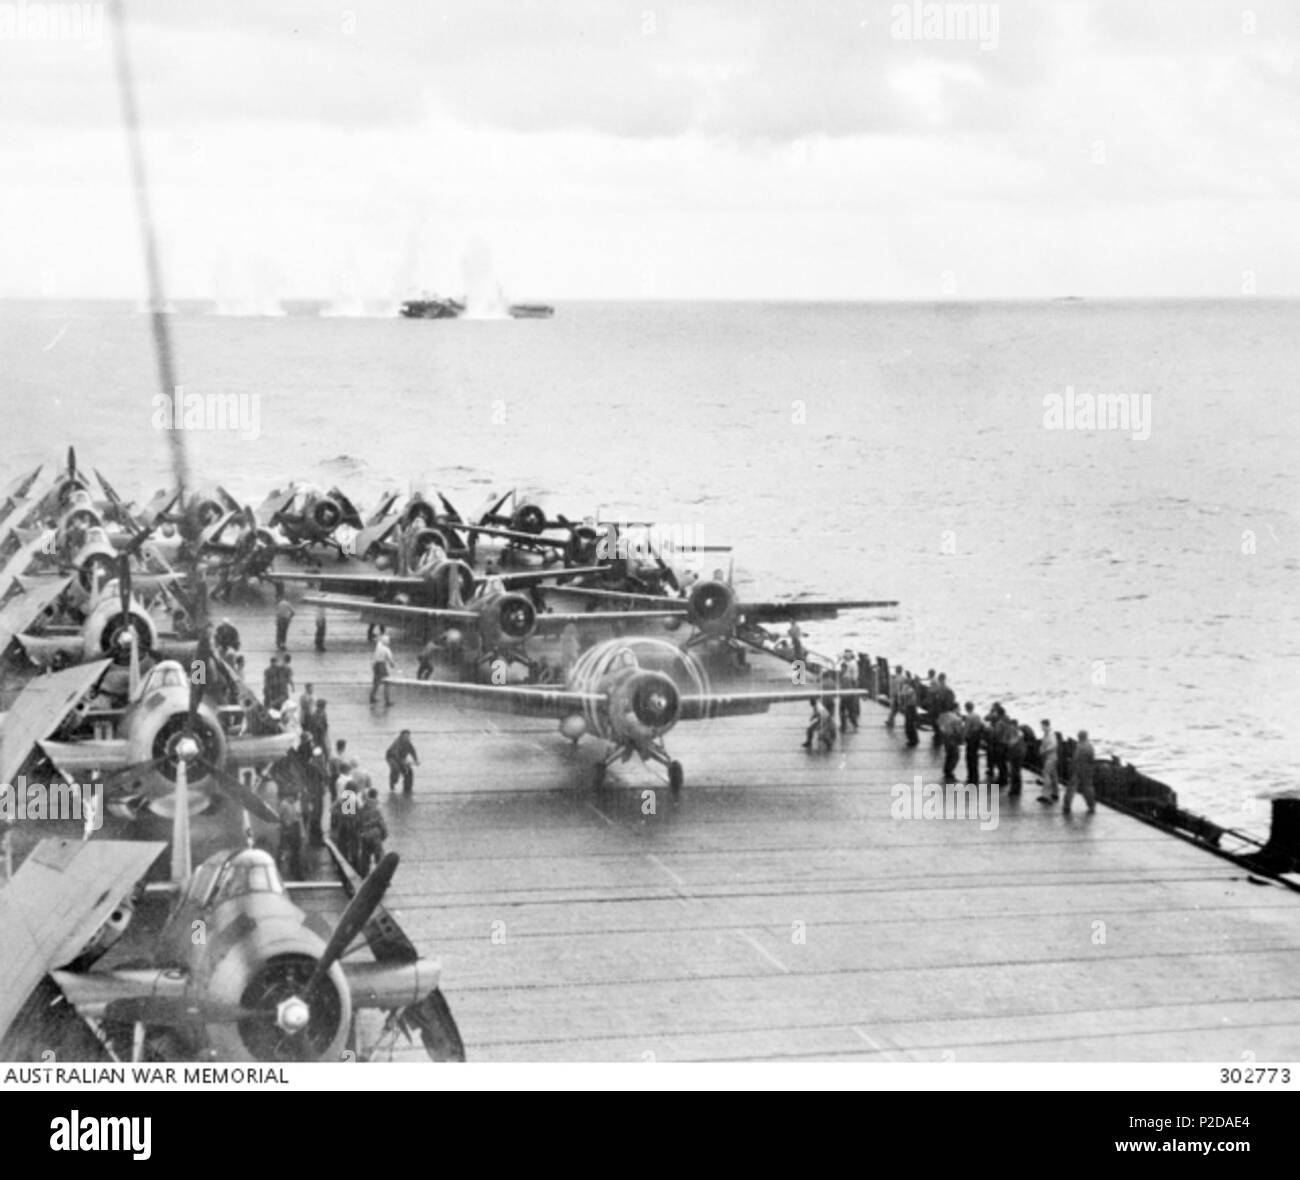 . The U.S. escort carrier USS Kitkun Bay (CVE-71) prepares to launch Grumman FM-2 Wildcat fighters of composite squadron VC-5 during the Battle of Samar on 25 October 1944. The aircraft visible on the left are Grumman TBF Avengers. In the distance, Japanese shells are splashing near the USS White Plains (CVE-66). AWM caption: off Samar, Philippines. 1944-10-25. just after 0700 the sea around the escort aircraft carrier USS White Plains erupts as she is straddled and near missed by 14 inch gunfire from Japanese battleships which have surprised the escort carrier task group 77:4:1. In the foregr Stock Photo